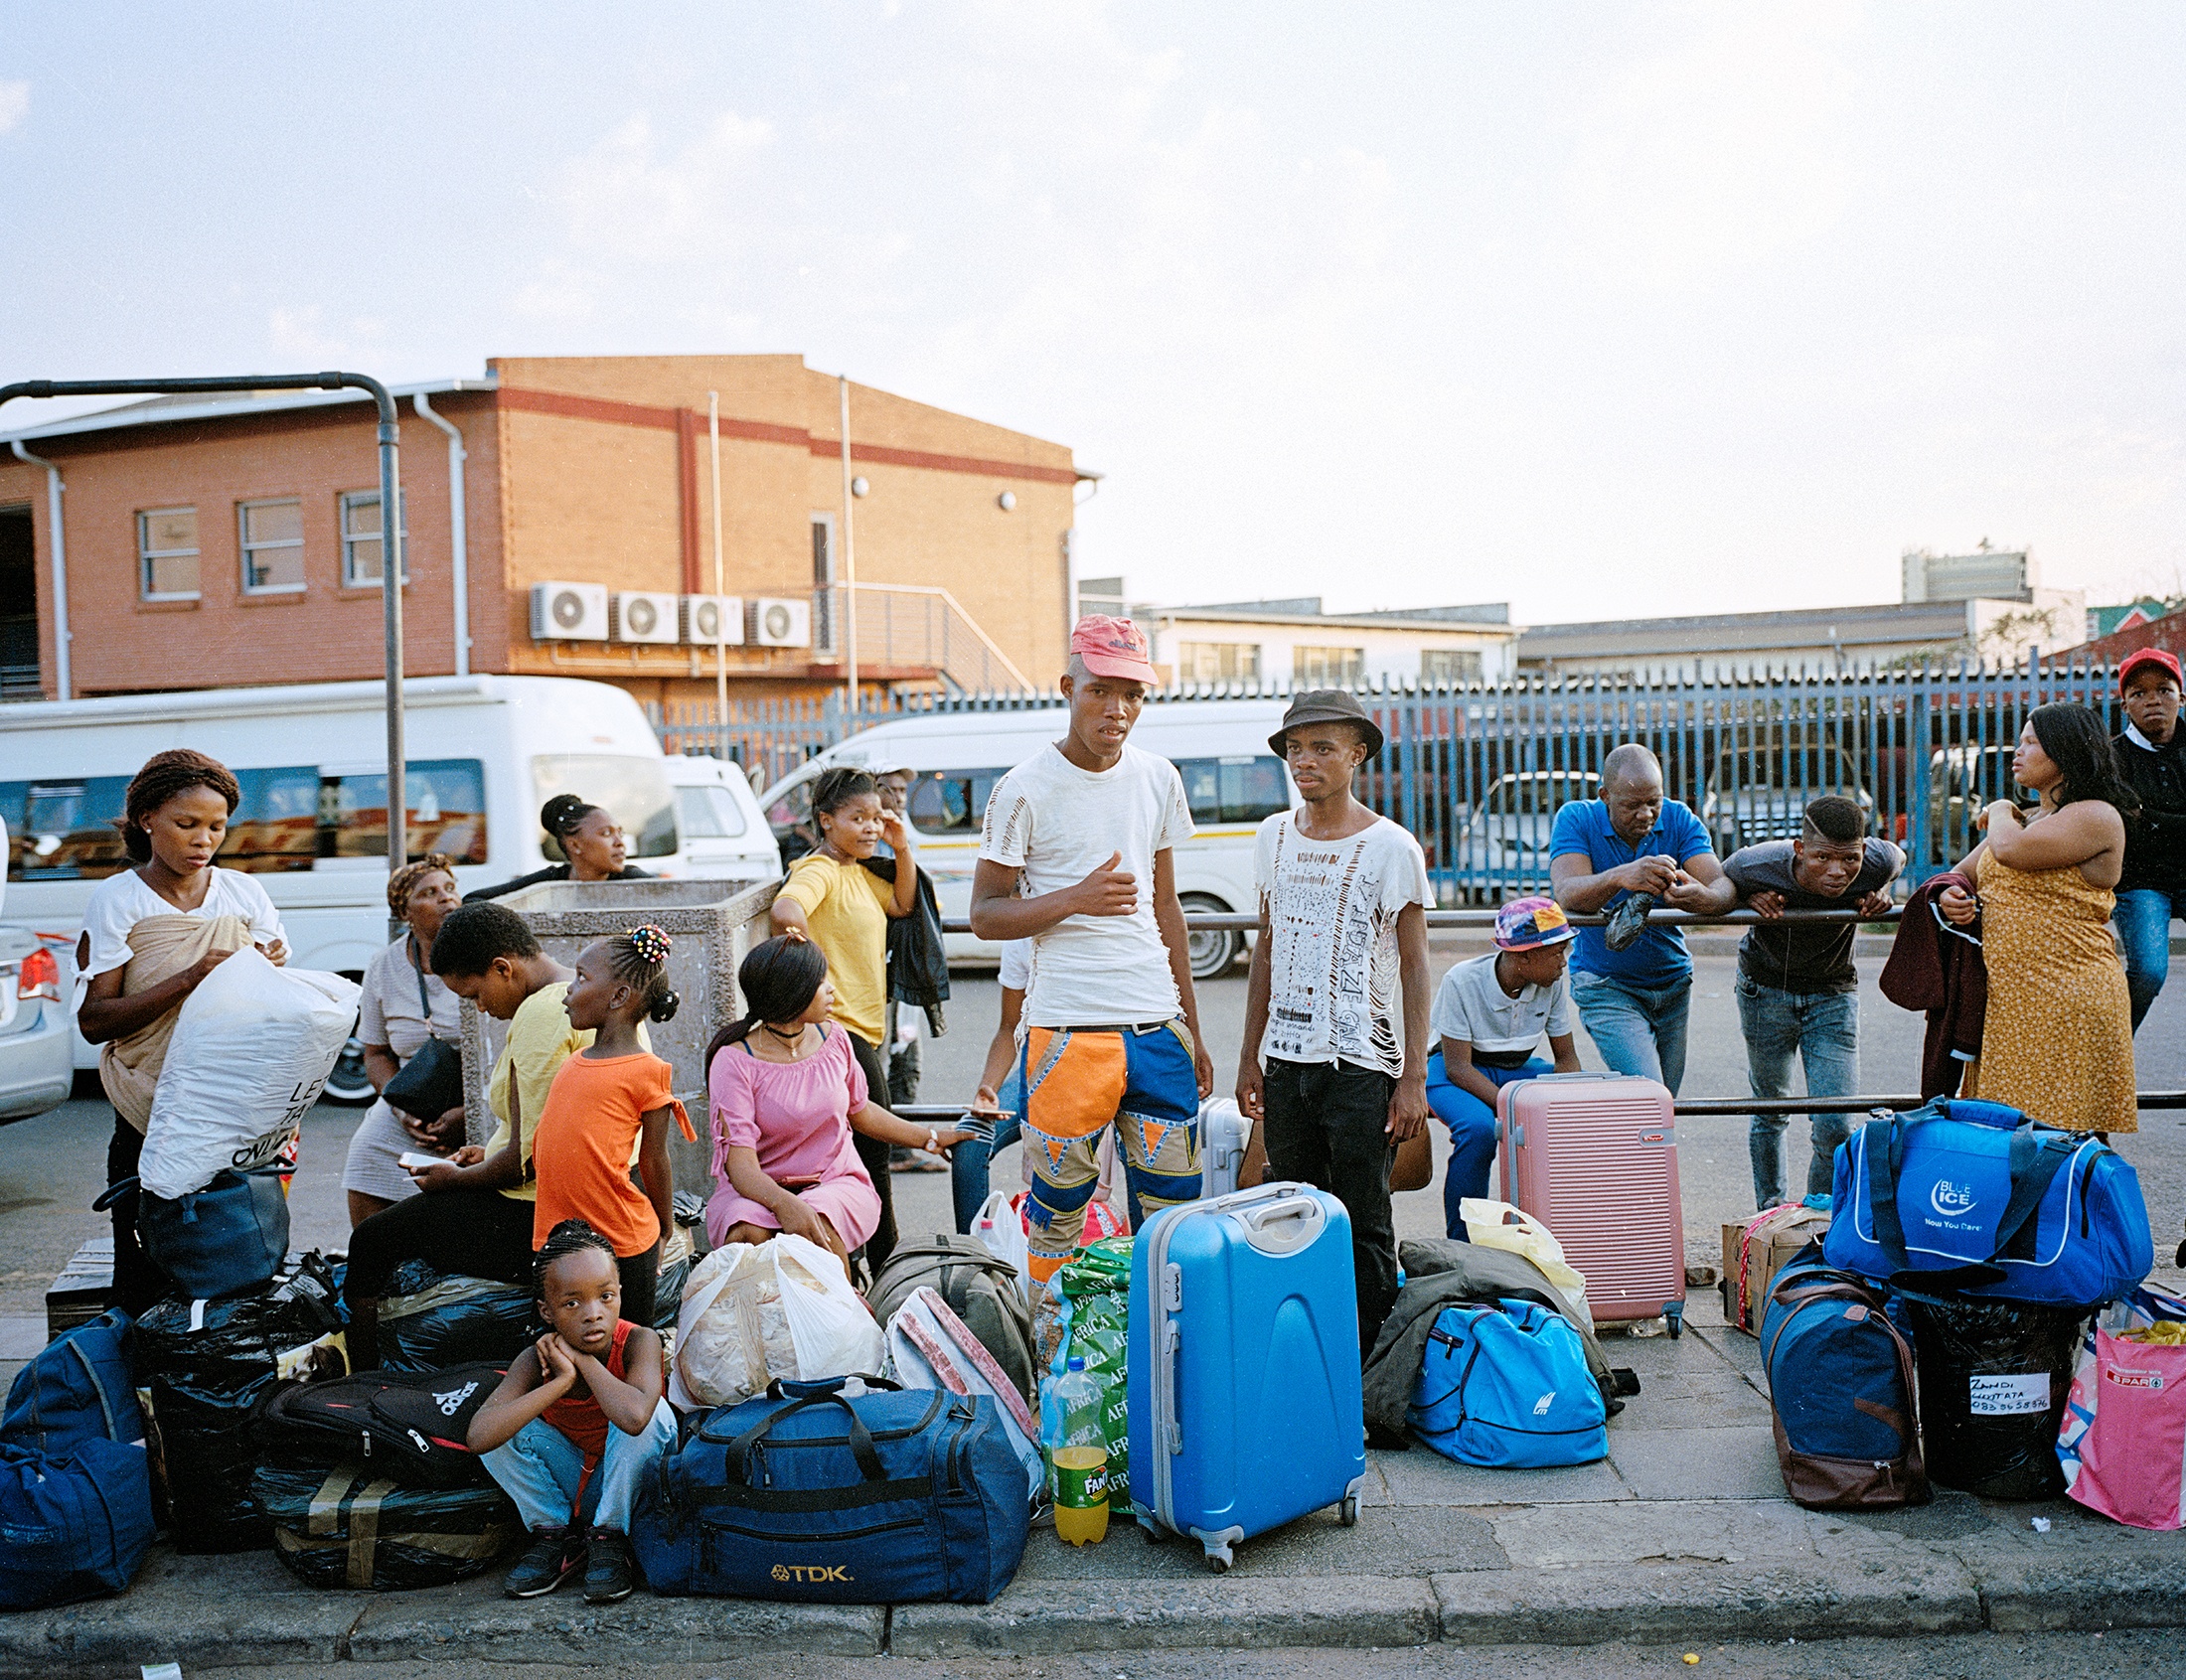 Lindokuhle Sobekwa's photograph 'Germiston bus stop' depicts a group of people with luggage on a roadside pavement.
